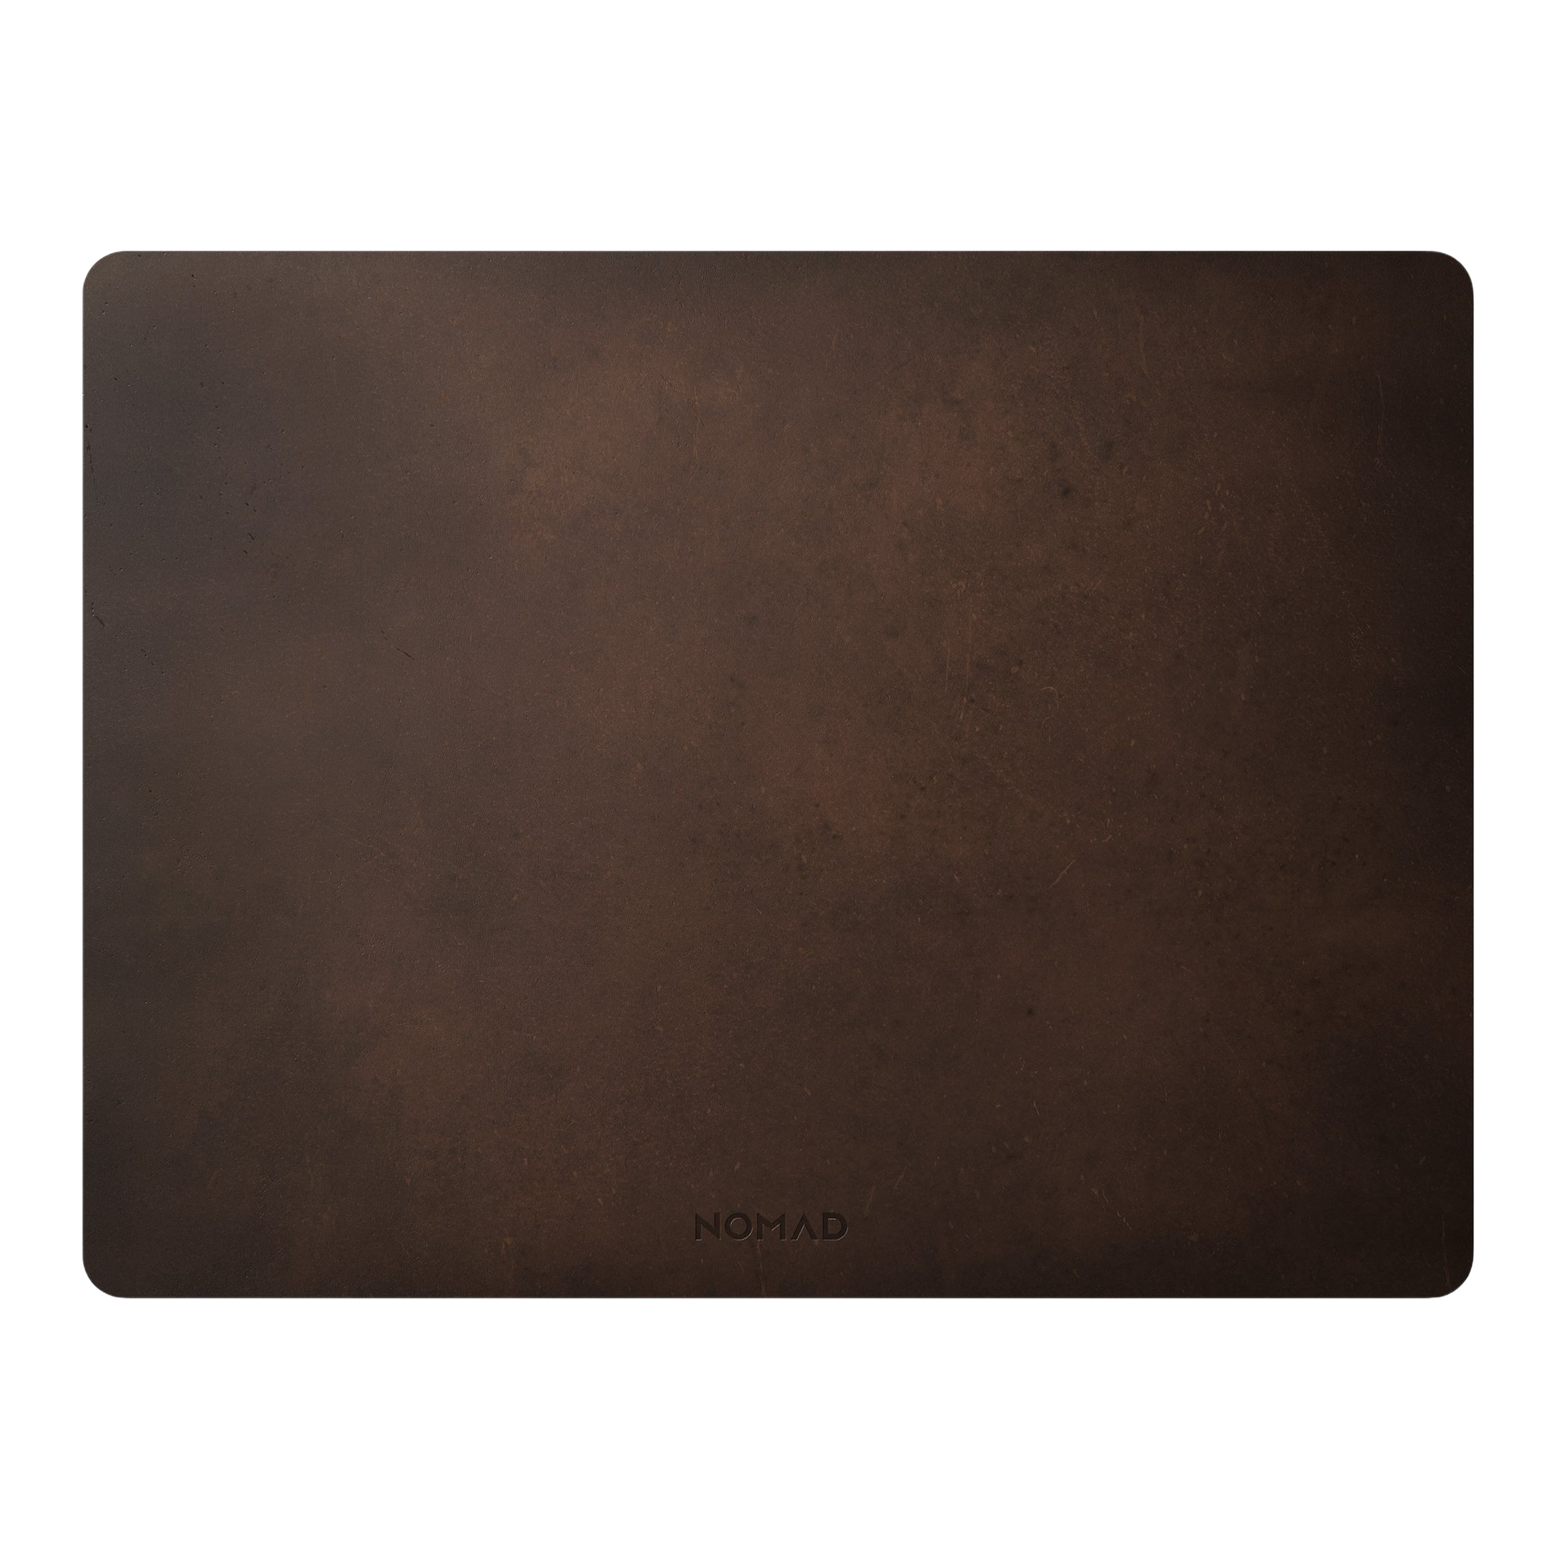 Nomad Horween Leather Mousepad 13 Inch - Rustic Brown